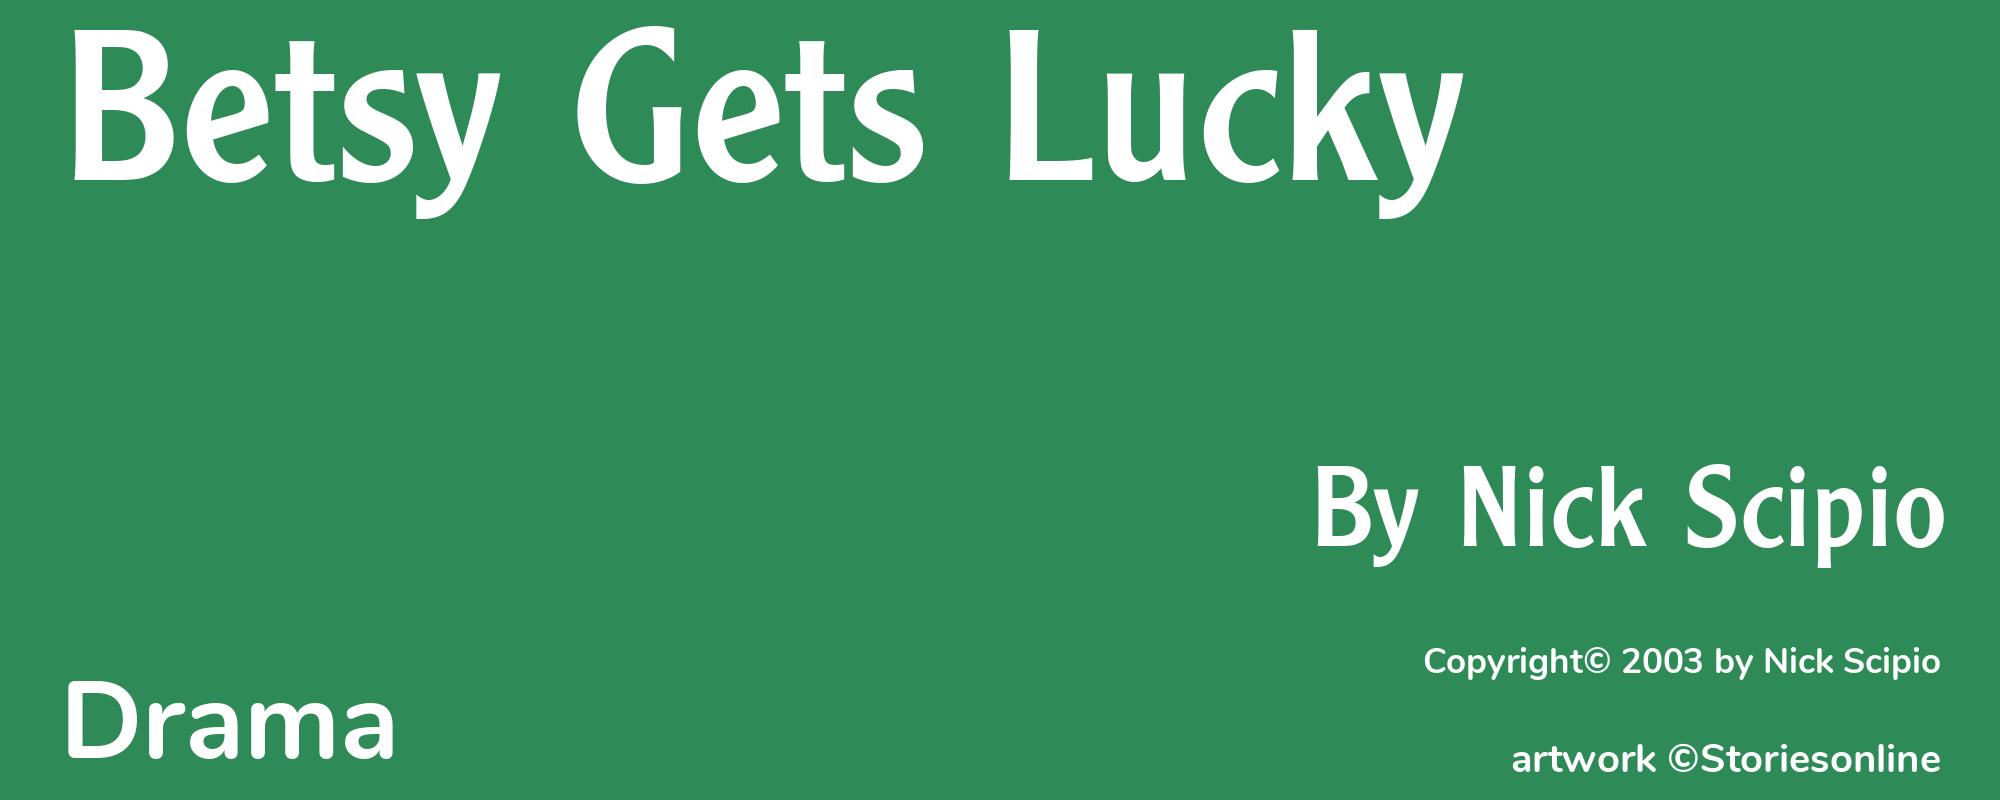 Betsy Gets Lucky - Cover